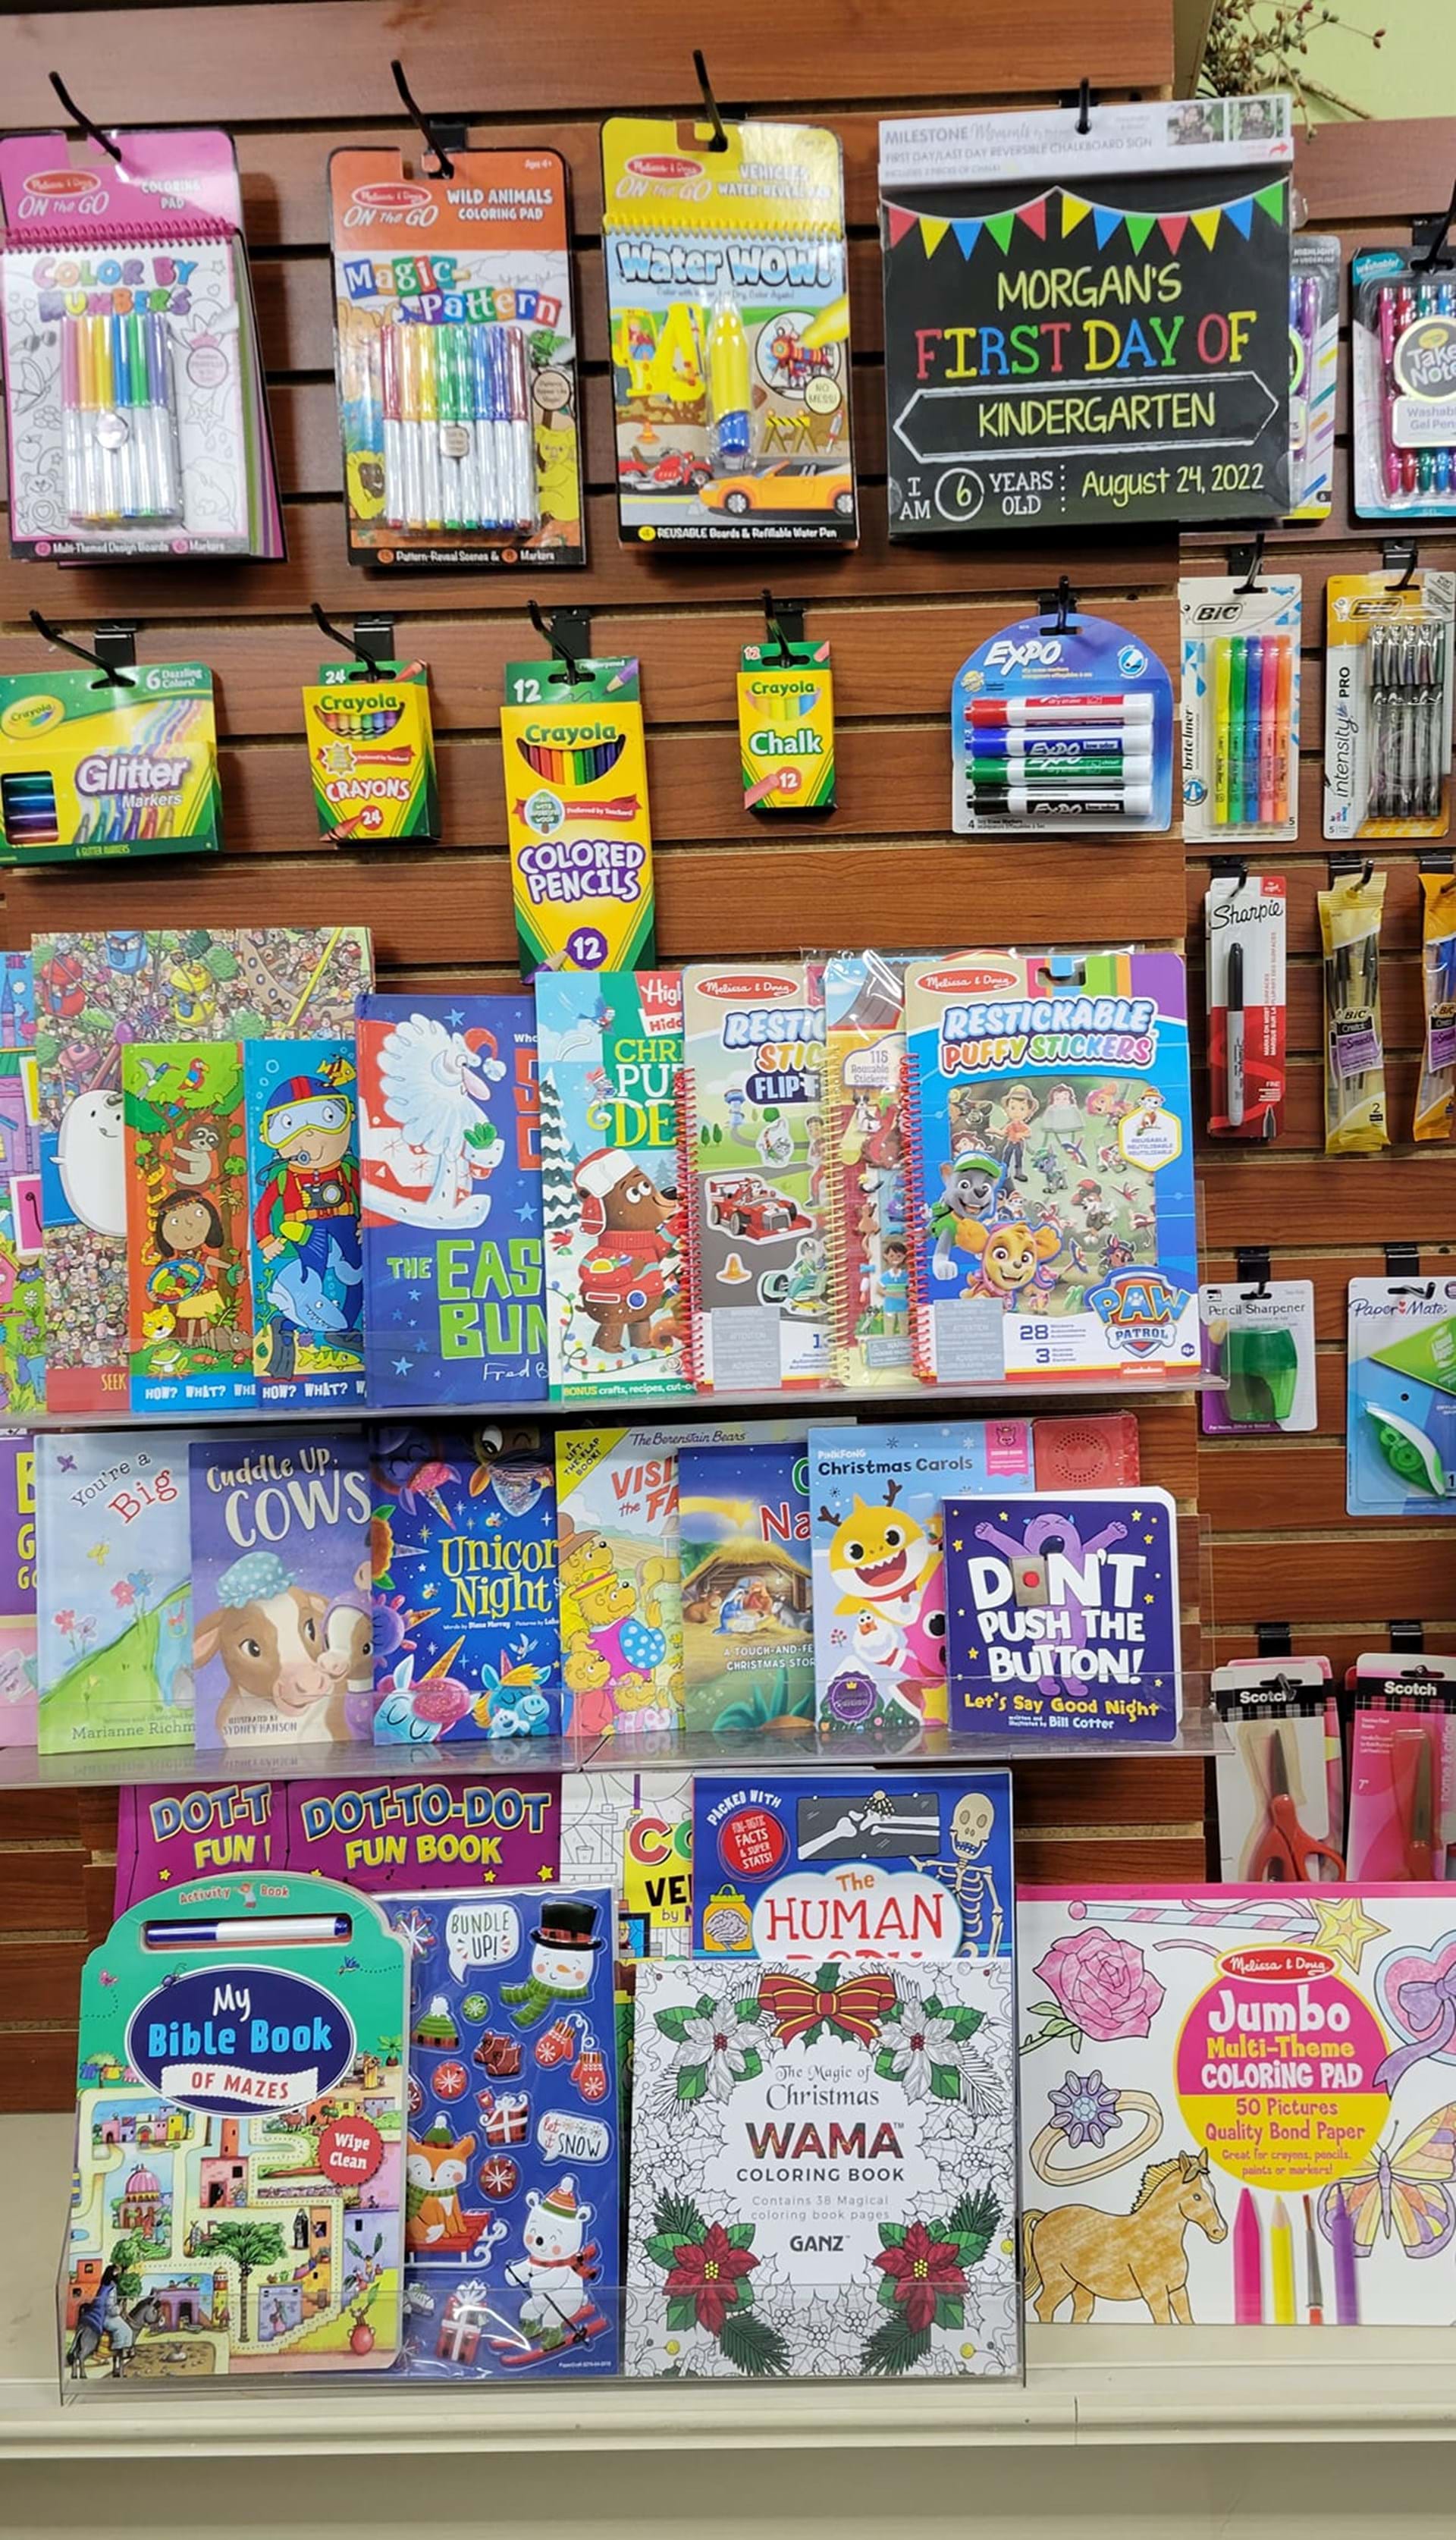 Gift items for kids and adults